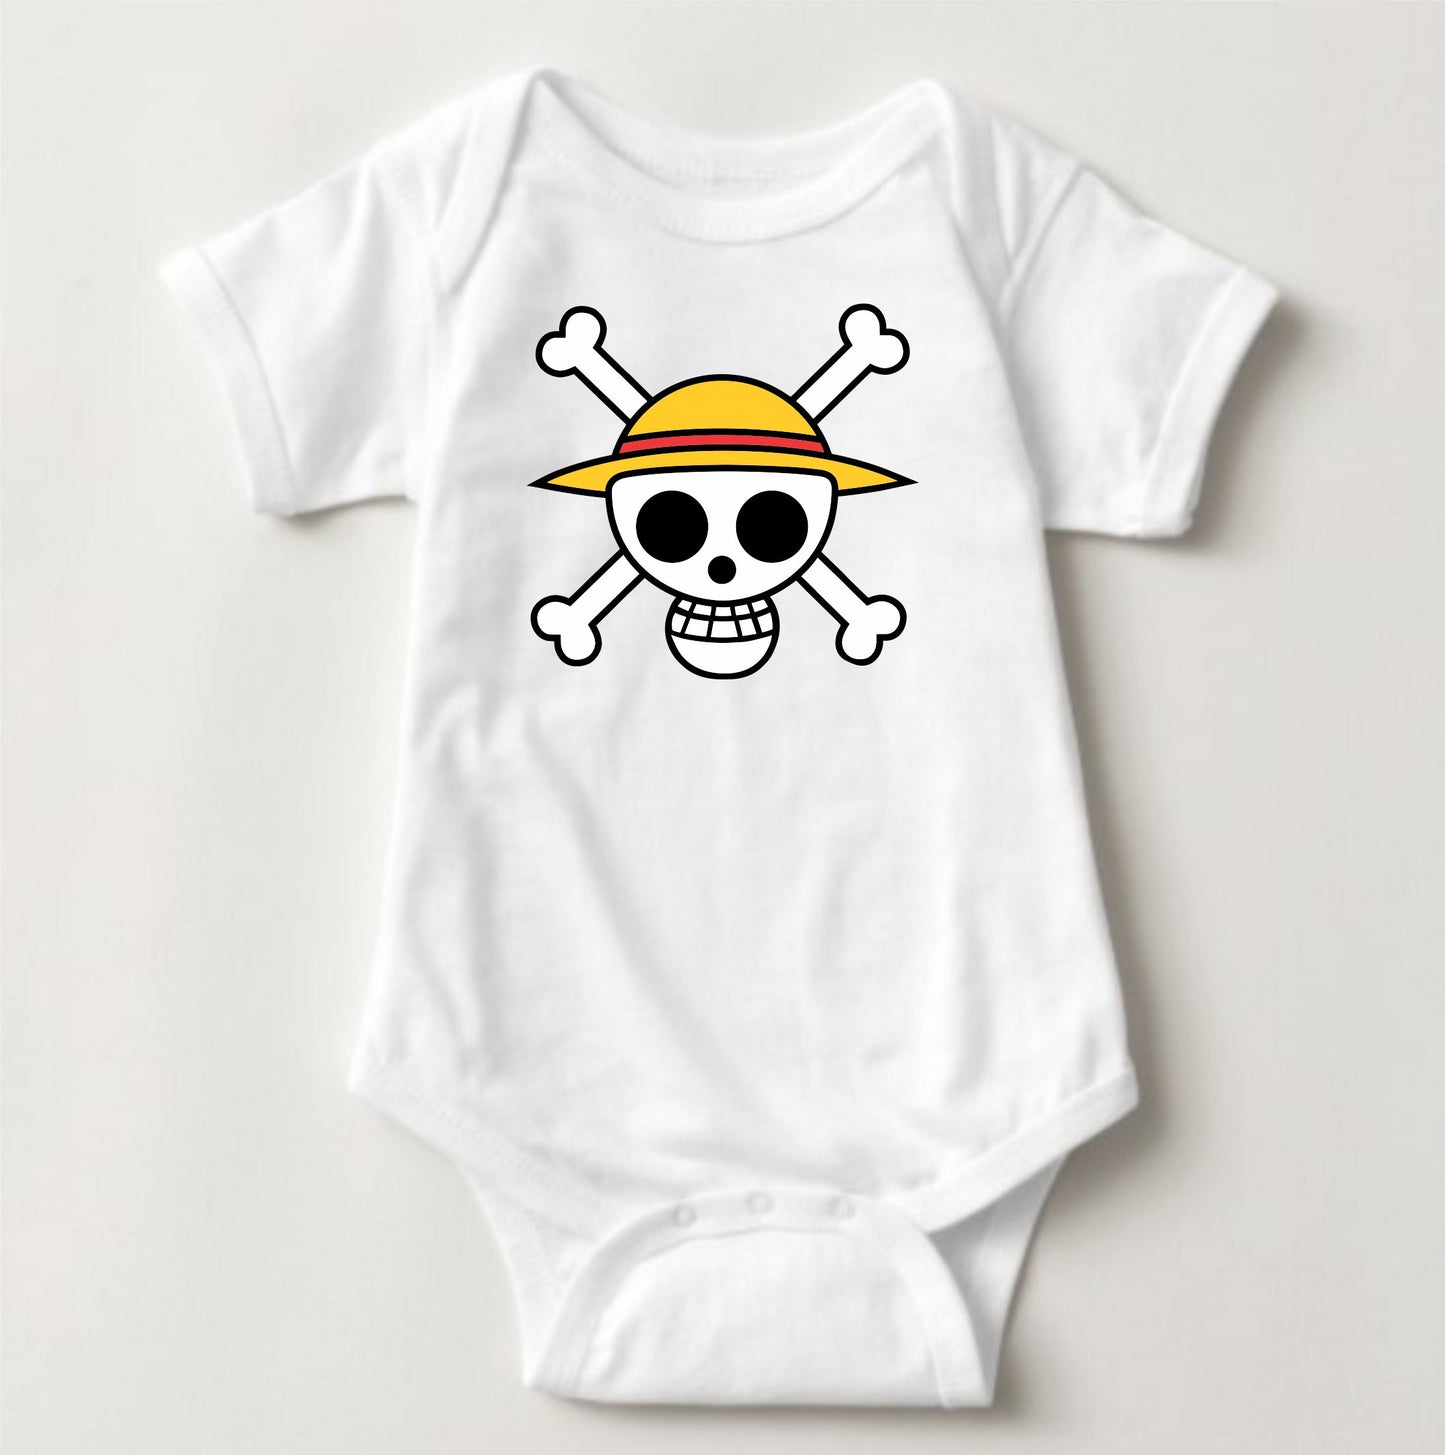 Baby Character Onesies - Jolly Roger One Piece Luffy